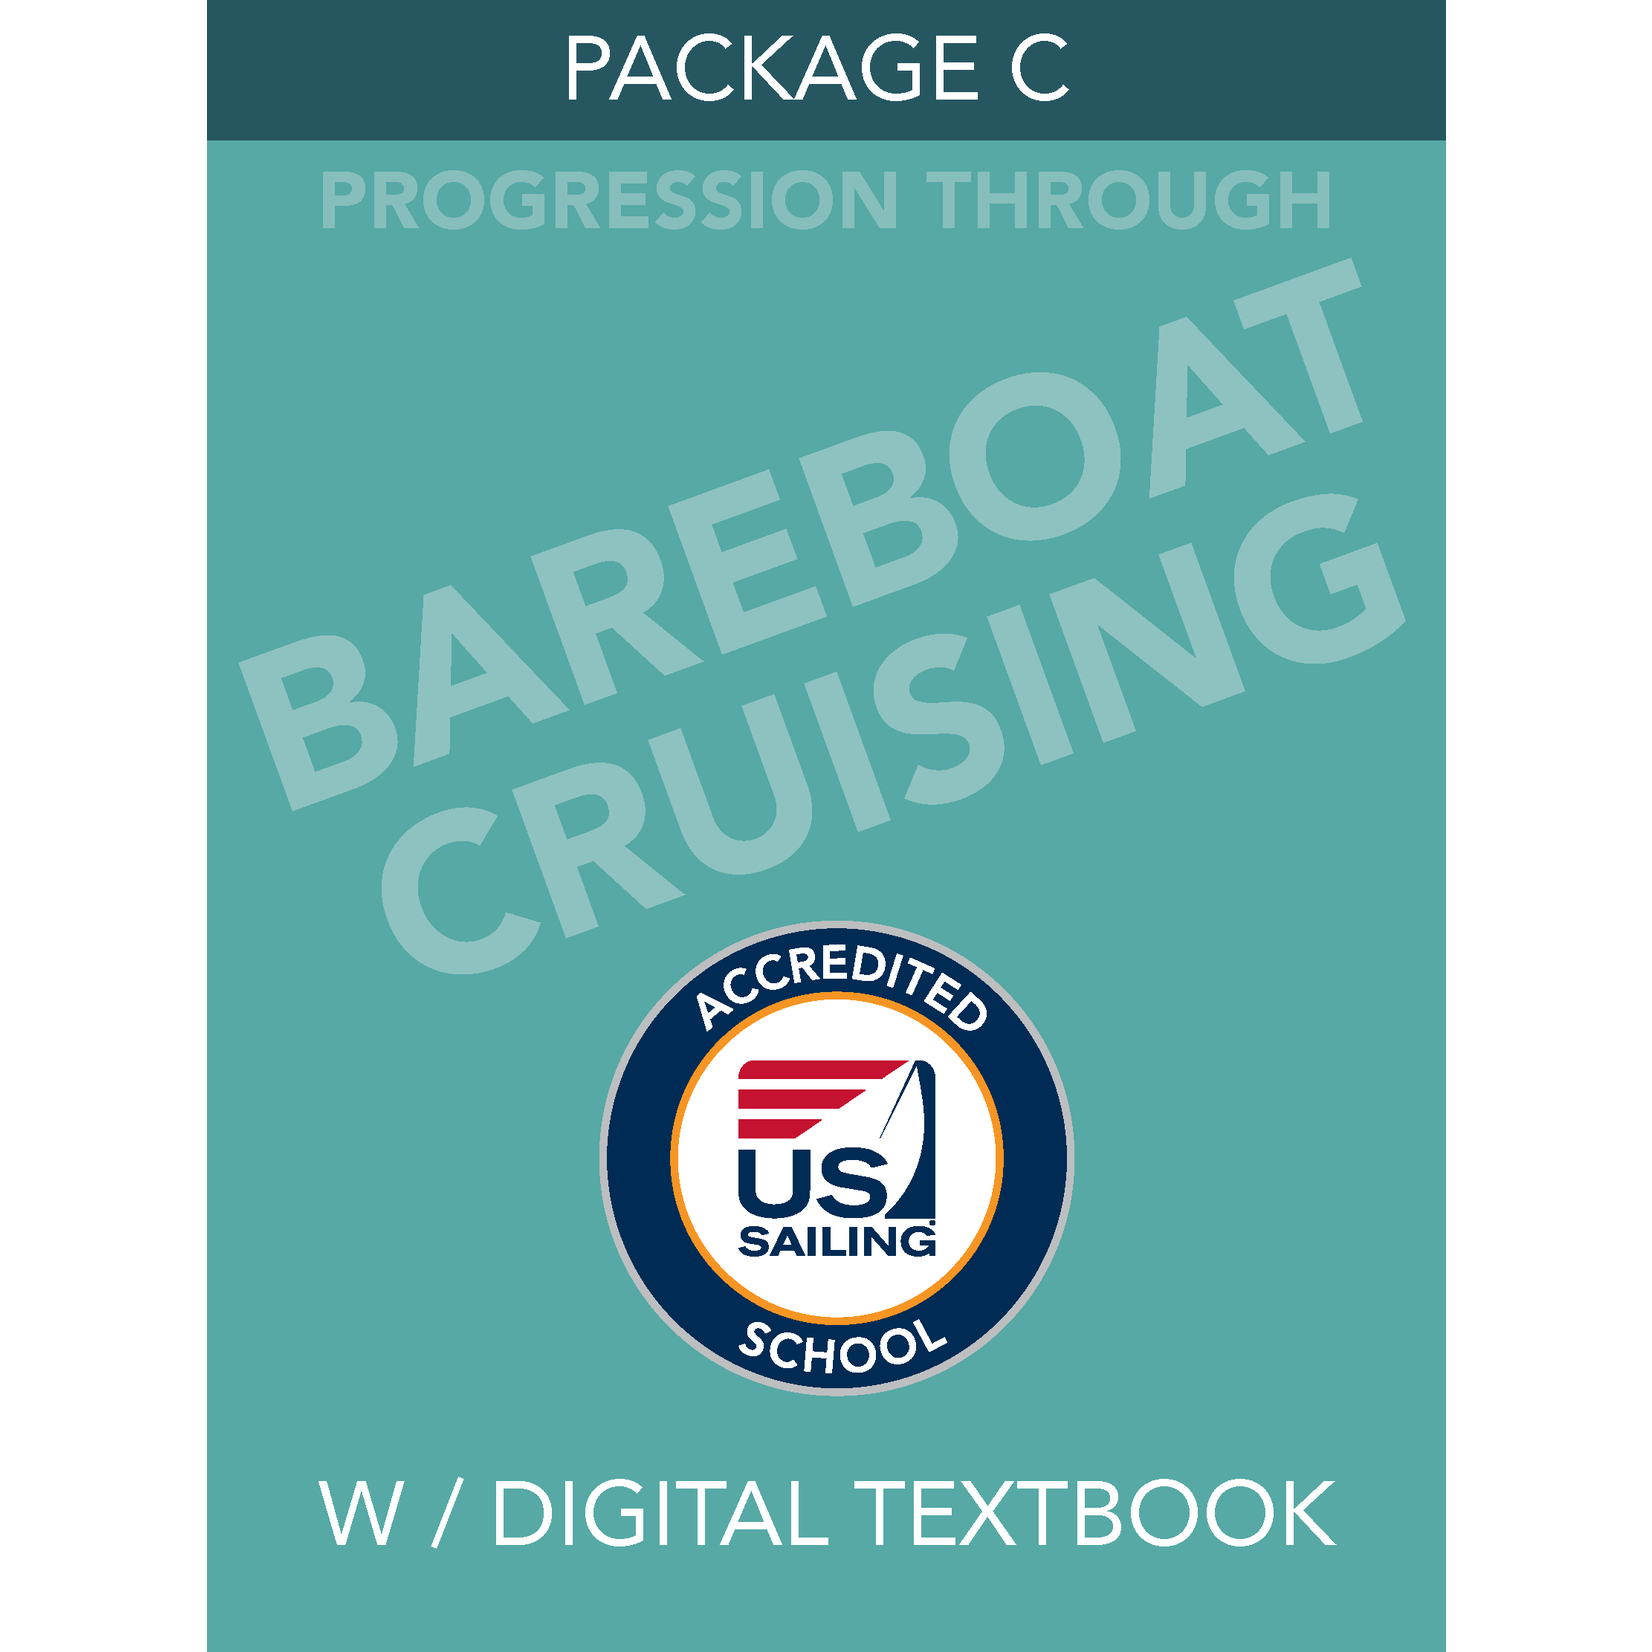 Package C- Bareboat Cruising with Digital Textbook